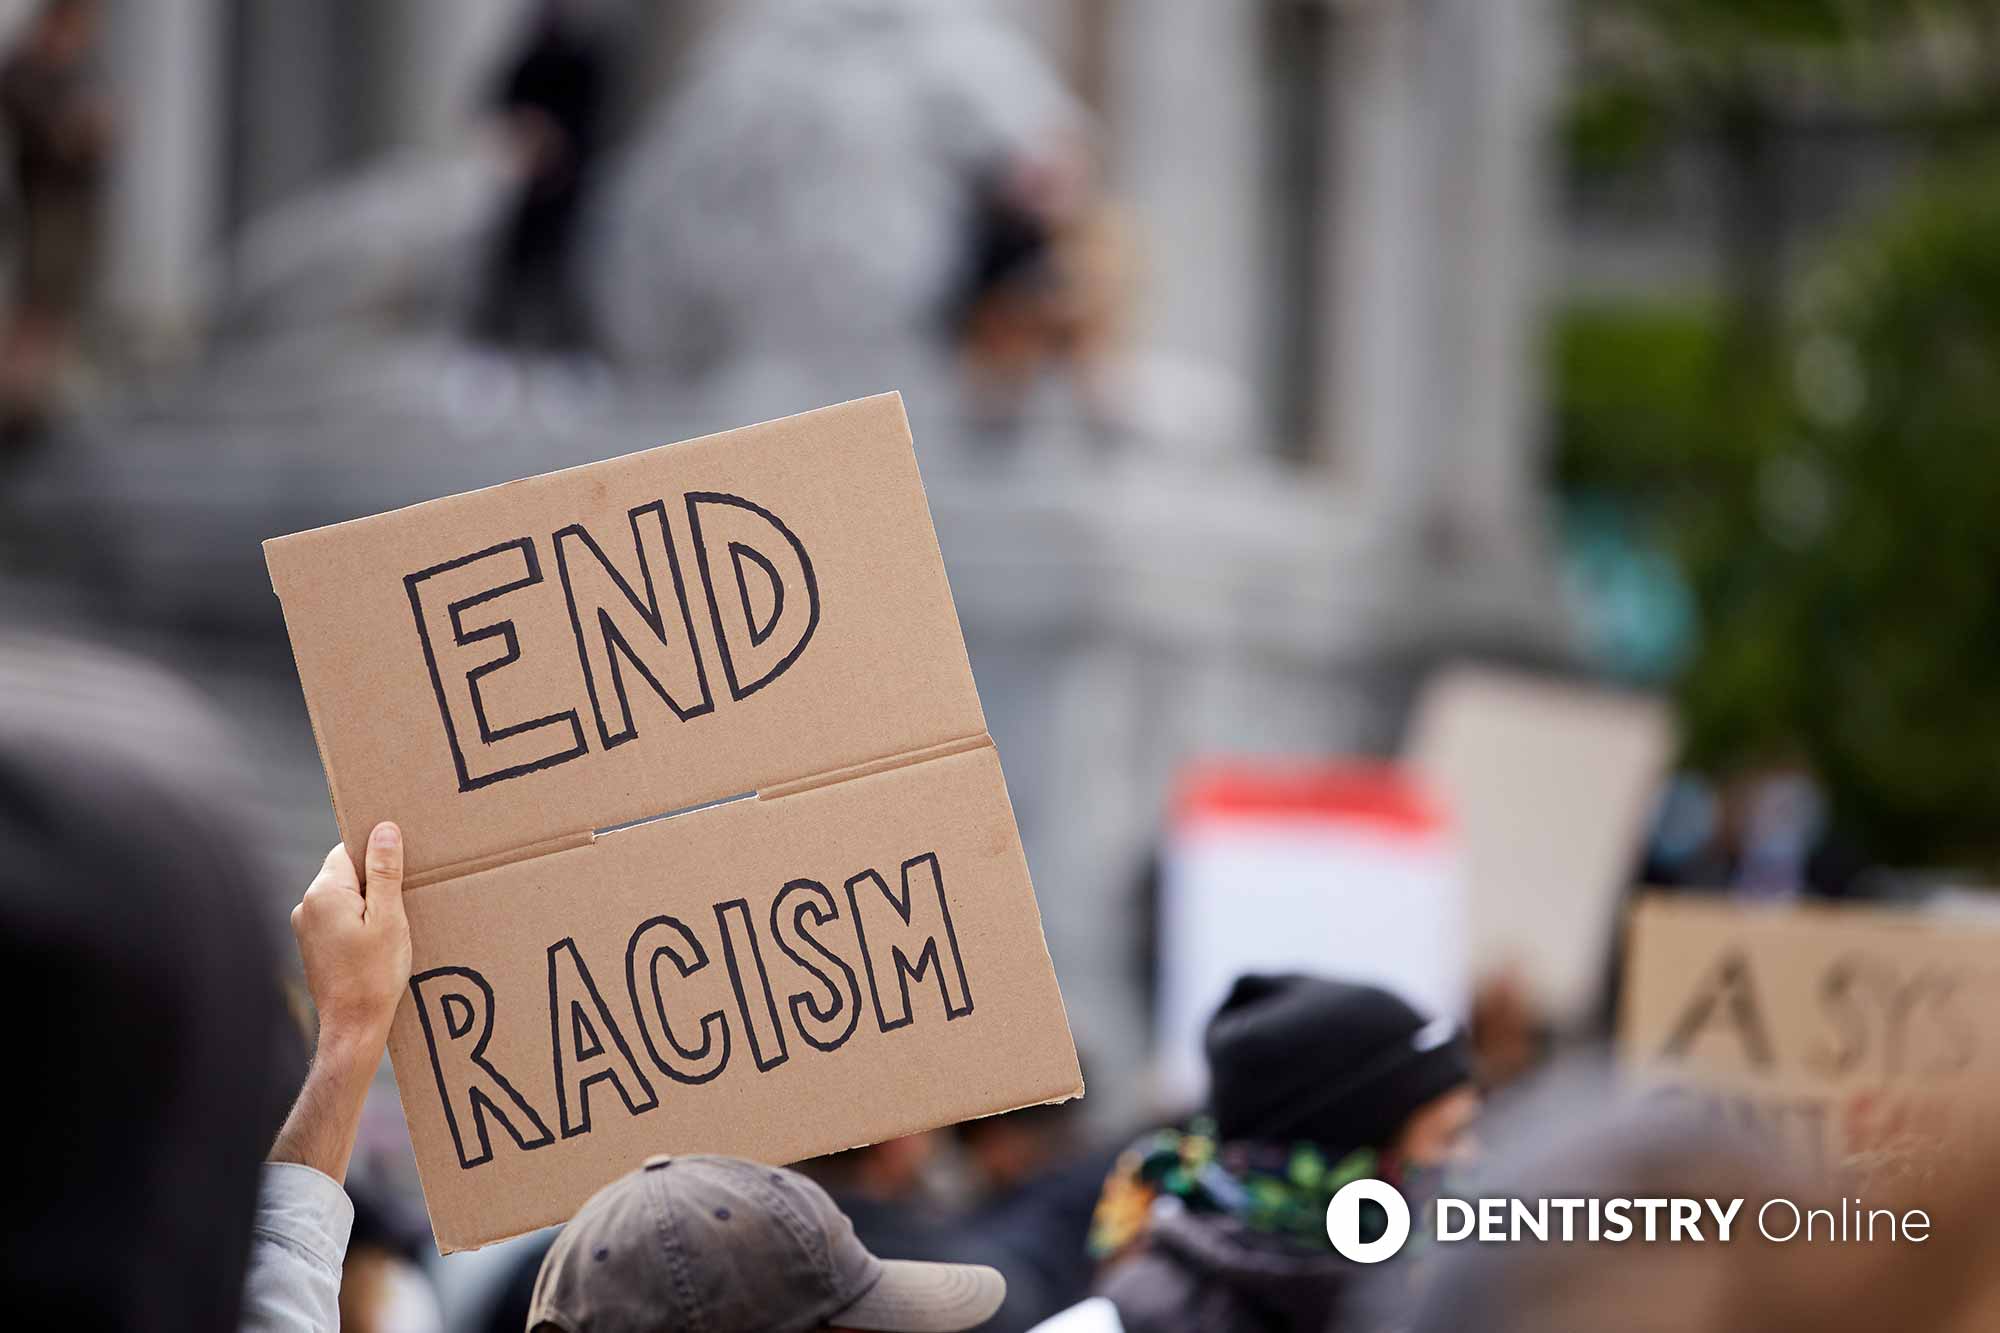 Leading dental experts are calling for urgent action to address questions of inequalities and diversity in the dental profession